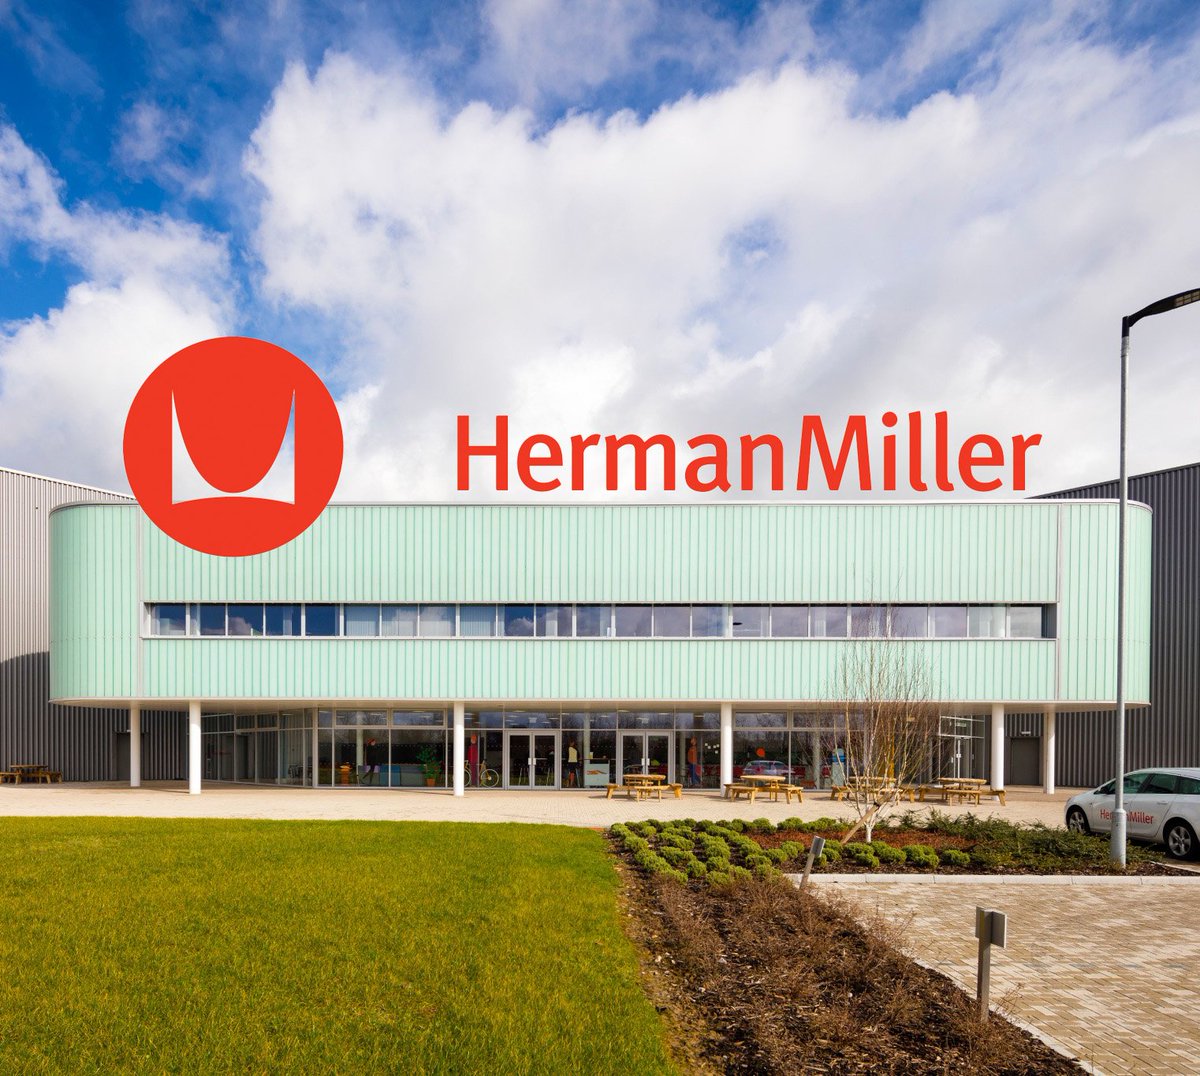 EcoCooling guides office furniture giant, @HermanMiller to set its own climate. The innovative air cooling technology will keep staff cool as well as reduce energy consumption. Read on >> bit.ly/2lT4XMt #hvac #evaporativecooling #energyefficiency #factorycooling #cooling